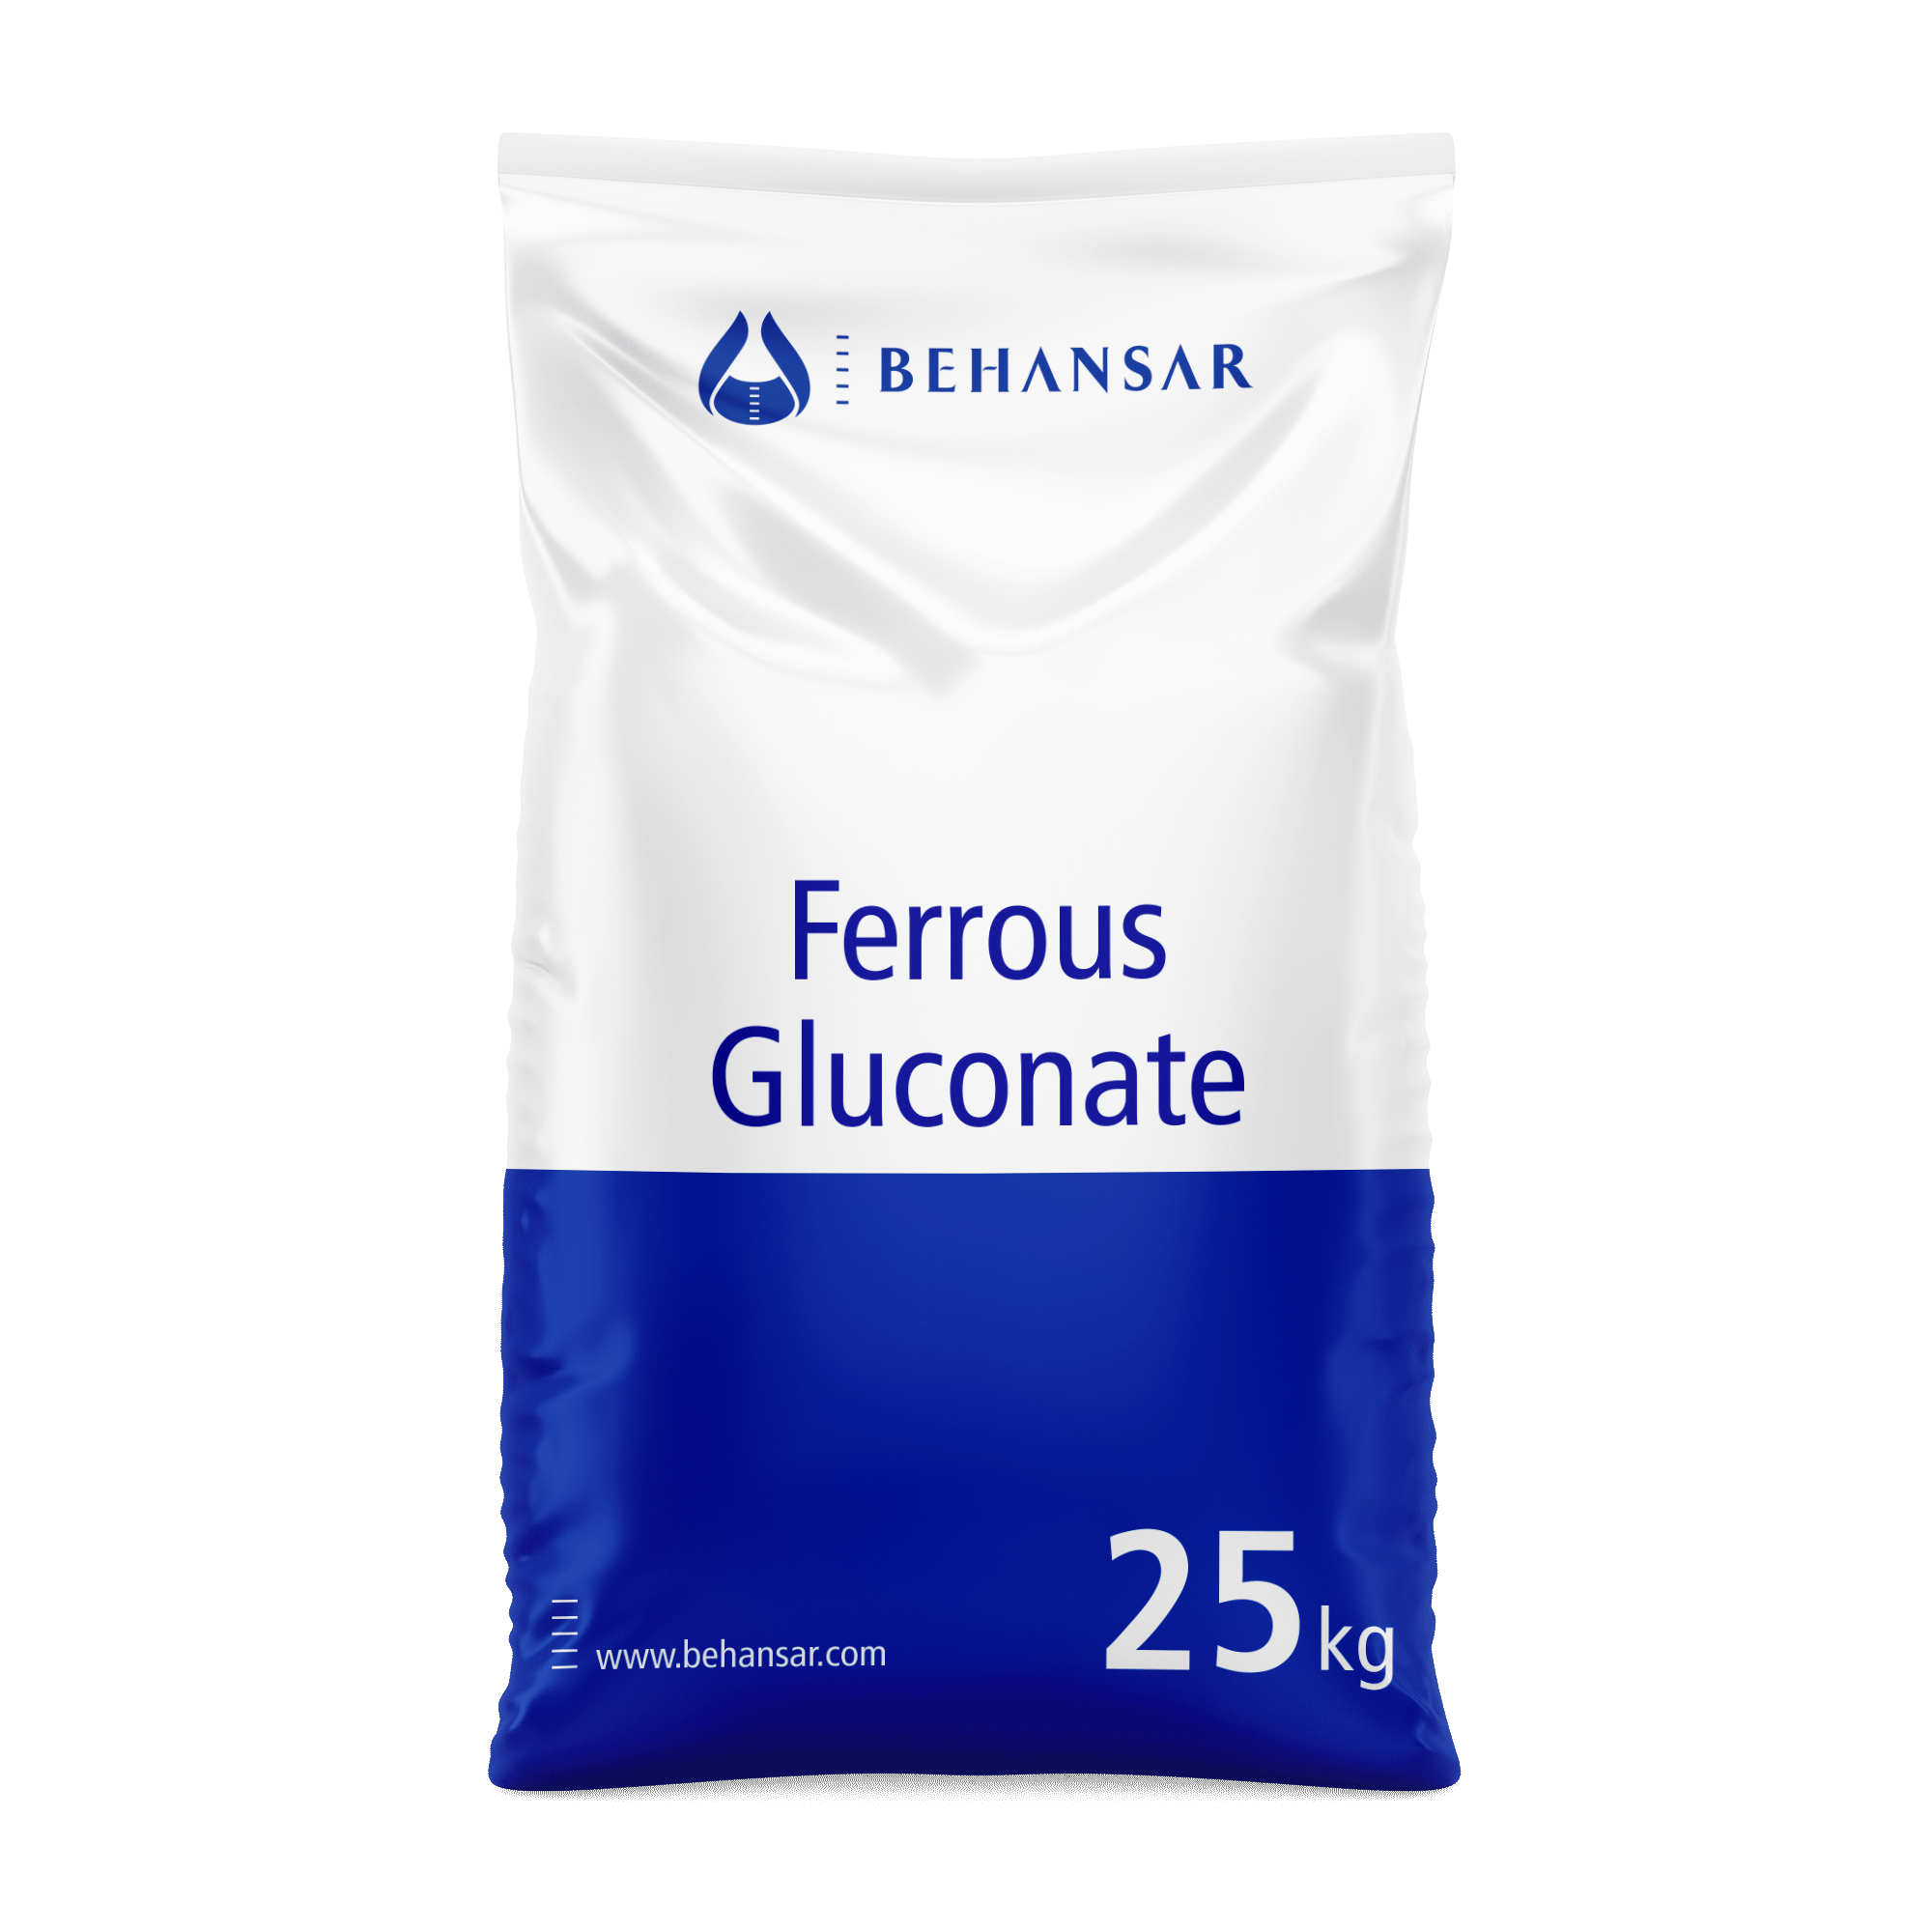 Ferrous Gluconate is one of the products of Behansar Co